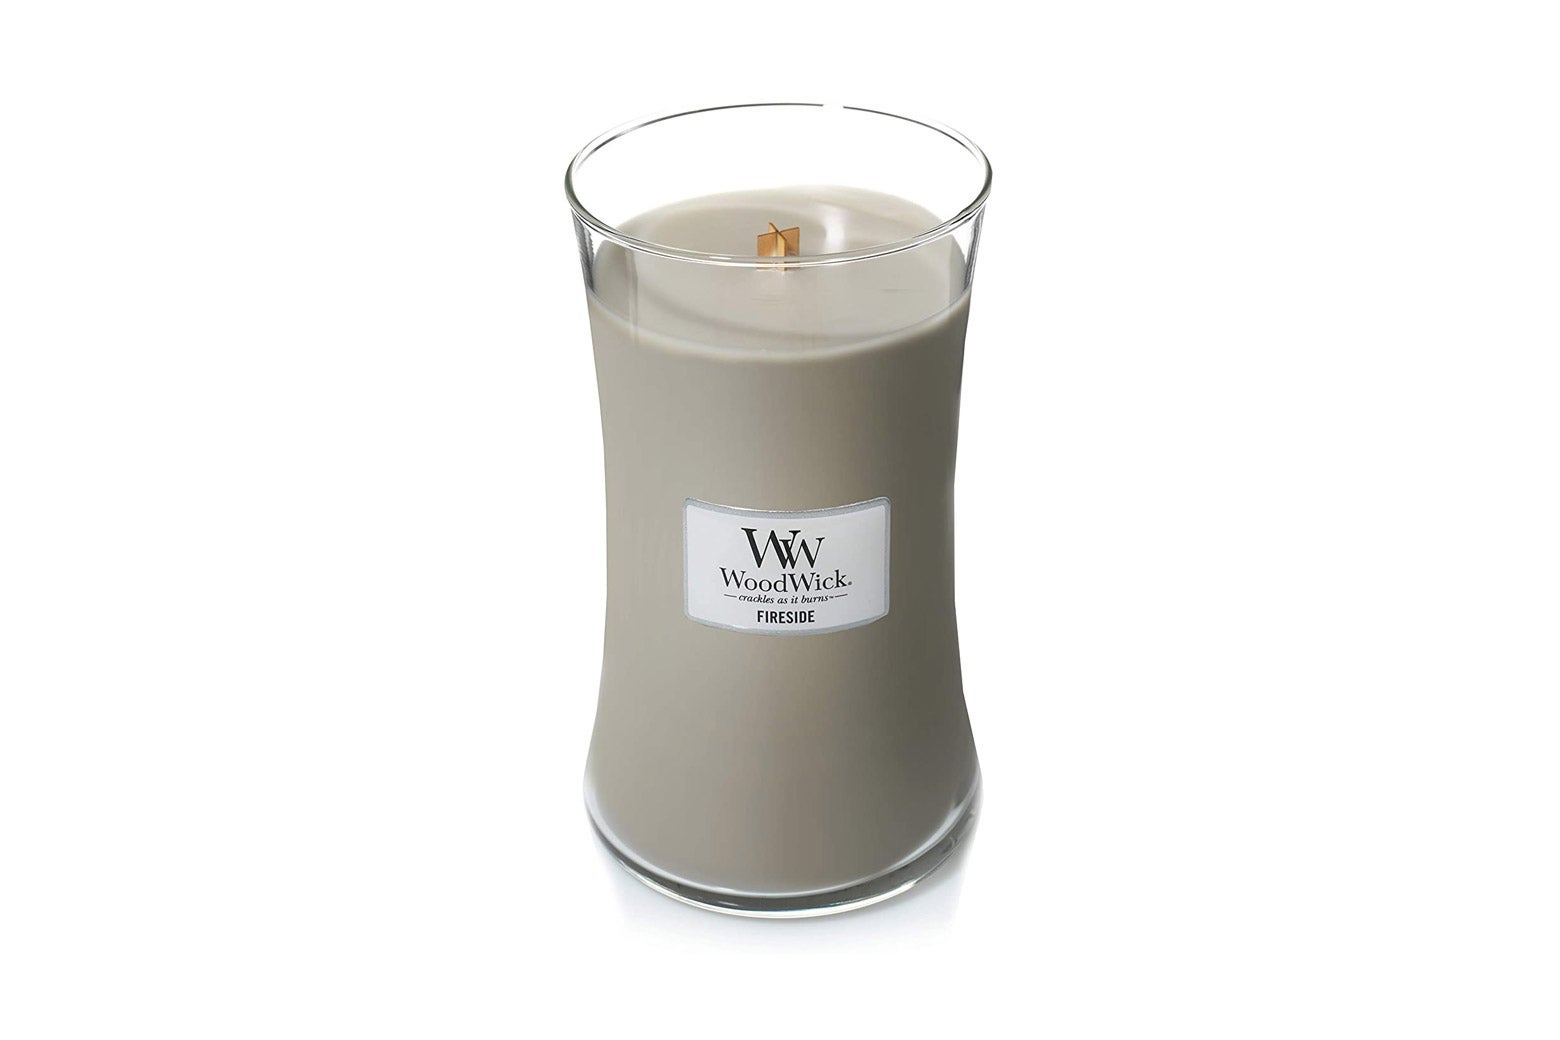 A cream-colored WoodWick candle.